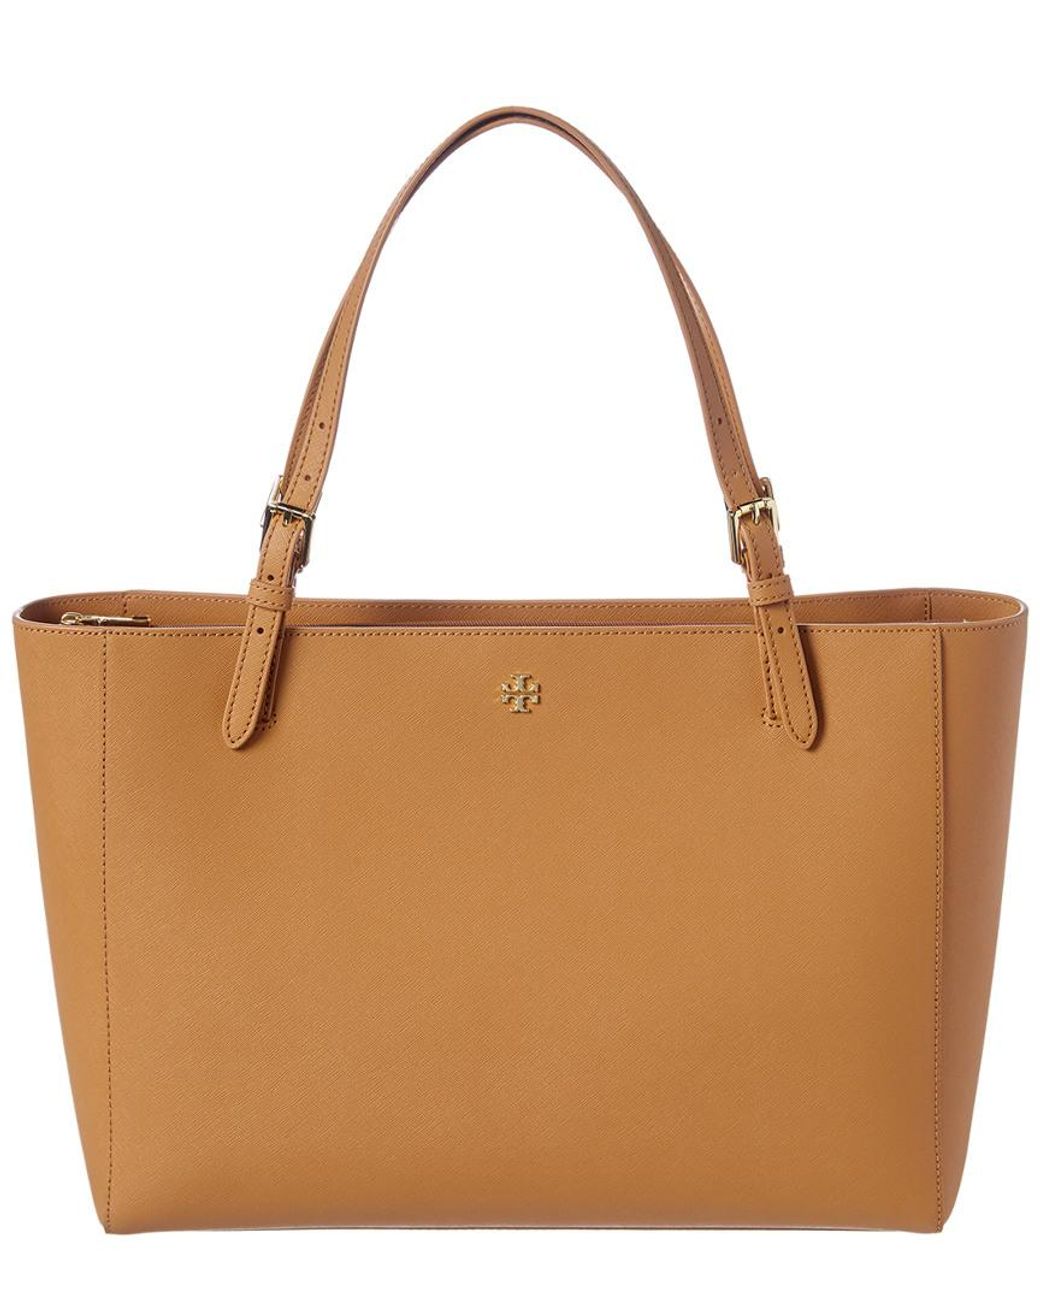 Tory Burch Emerson Large Leather Buckle Tote in Brown | Lyst Australia